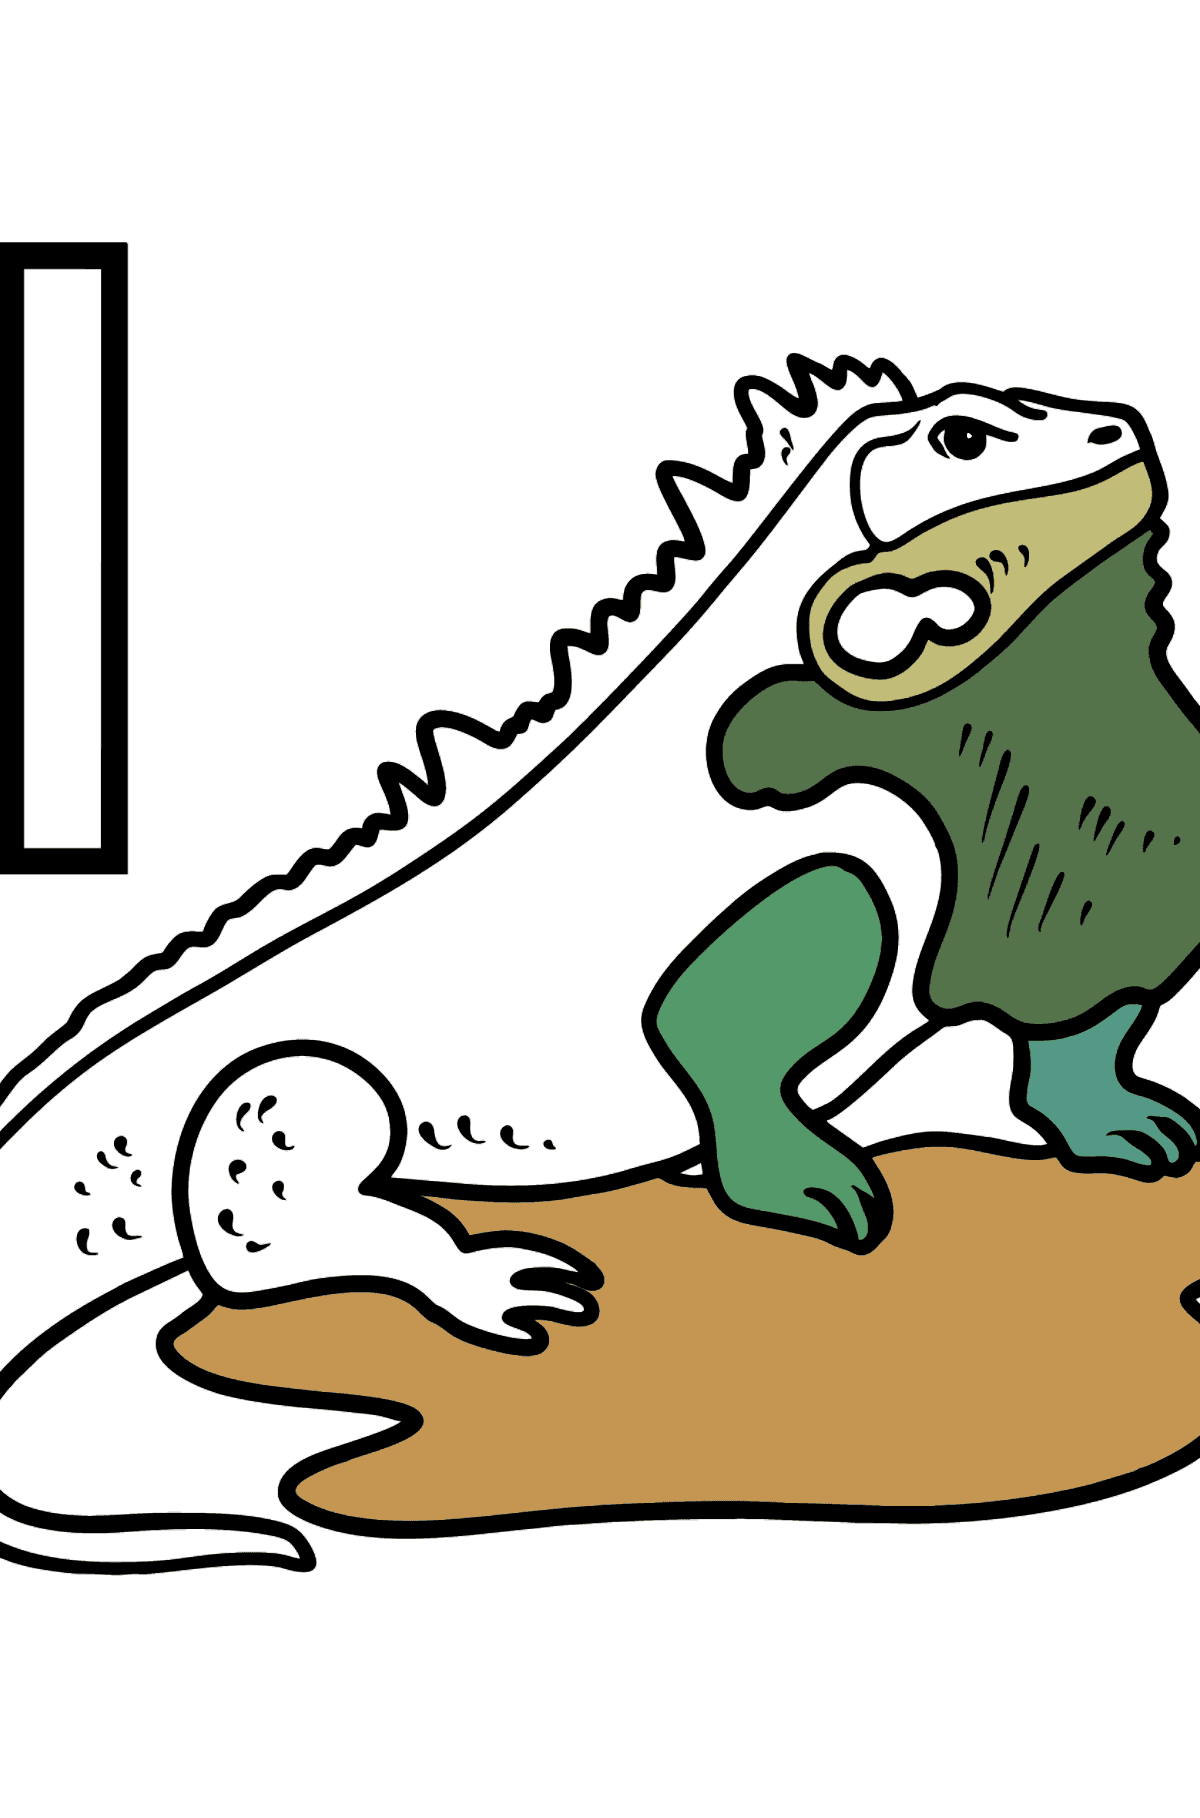 Spanish Letter I coloring pages - IGUANA - Coloring Pages for Kids